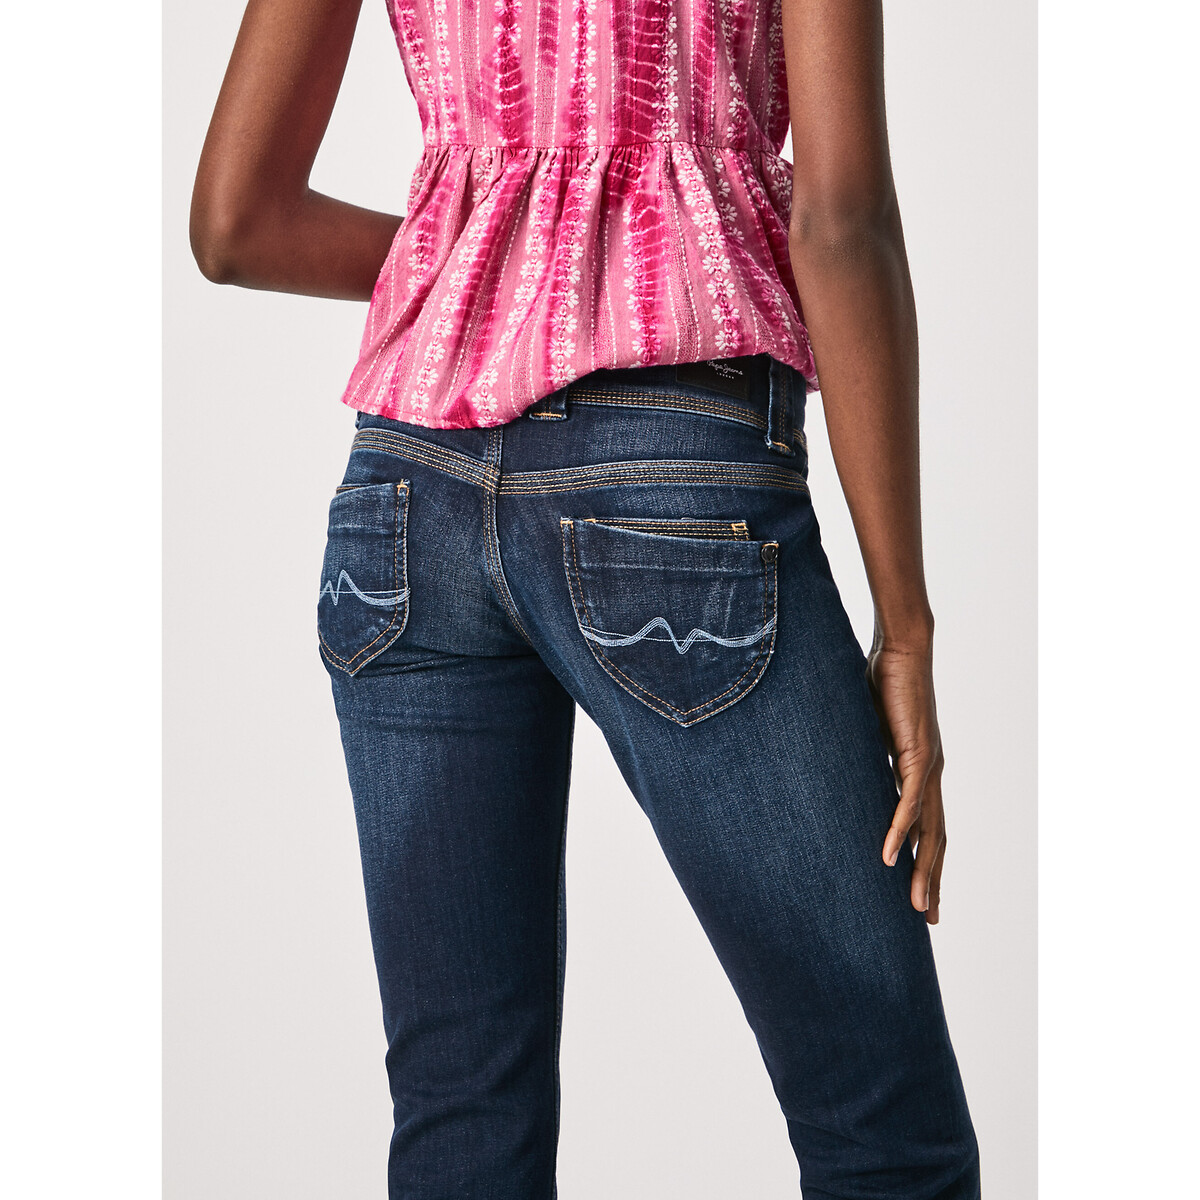 Redoute low | La rise Pepe Jeans straight jeans with Venus